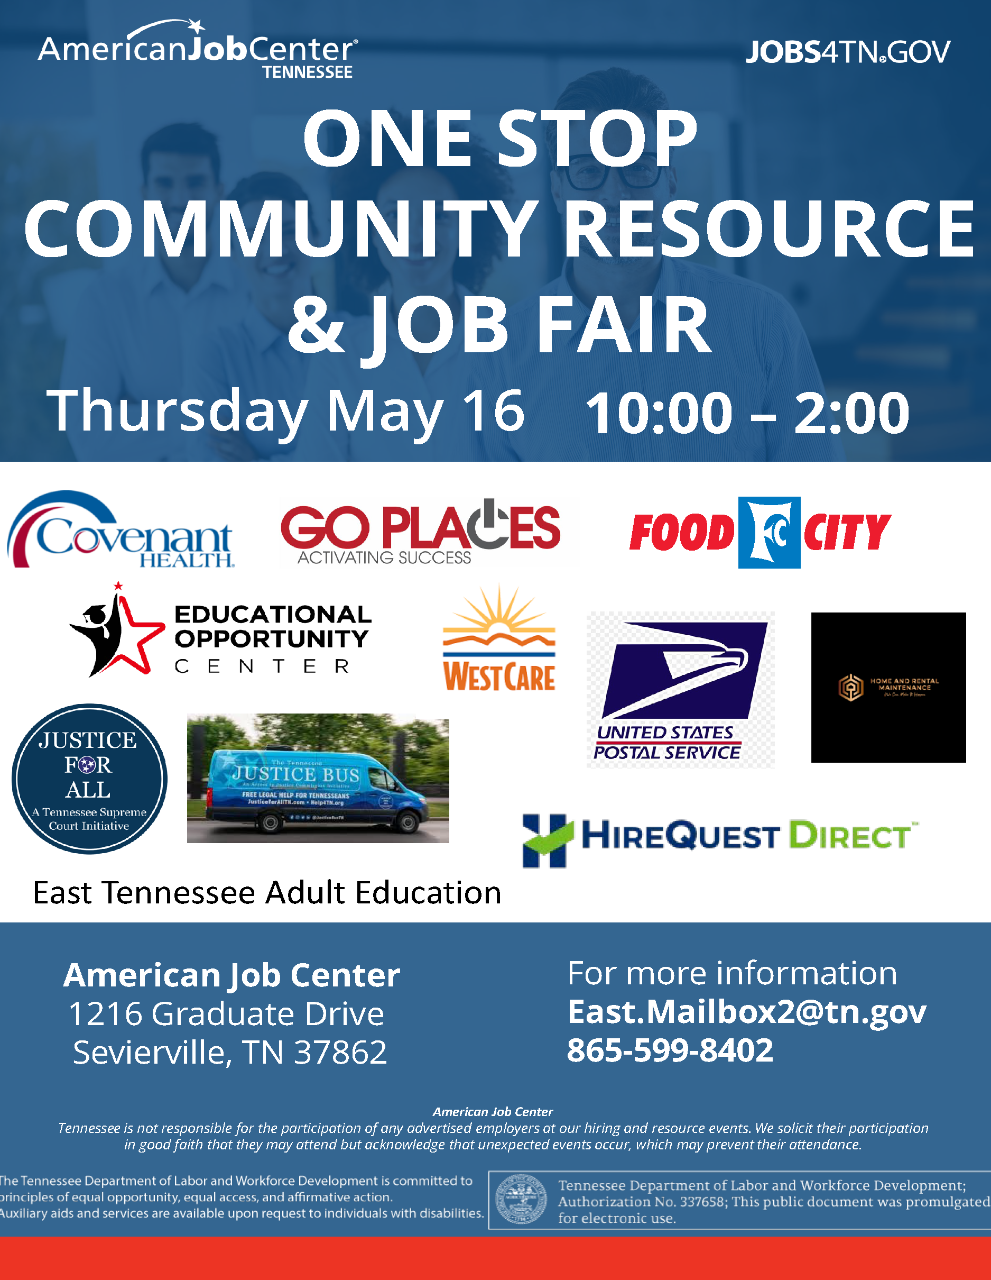 One-Stop Community Resource & Job Fair in Sevierville is May 16